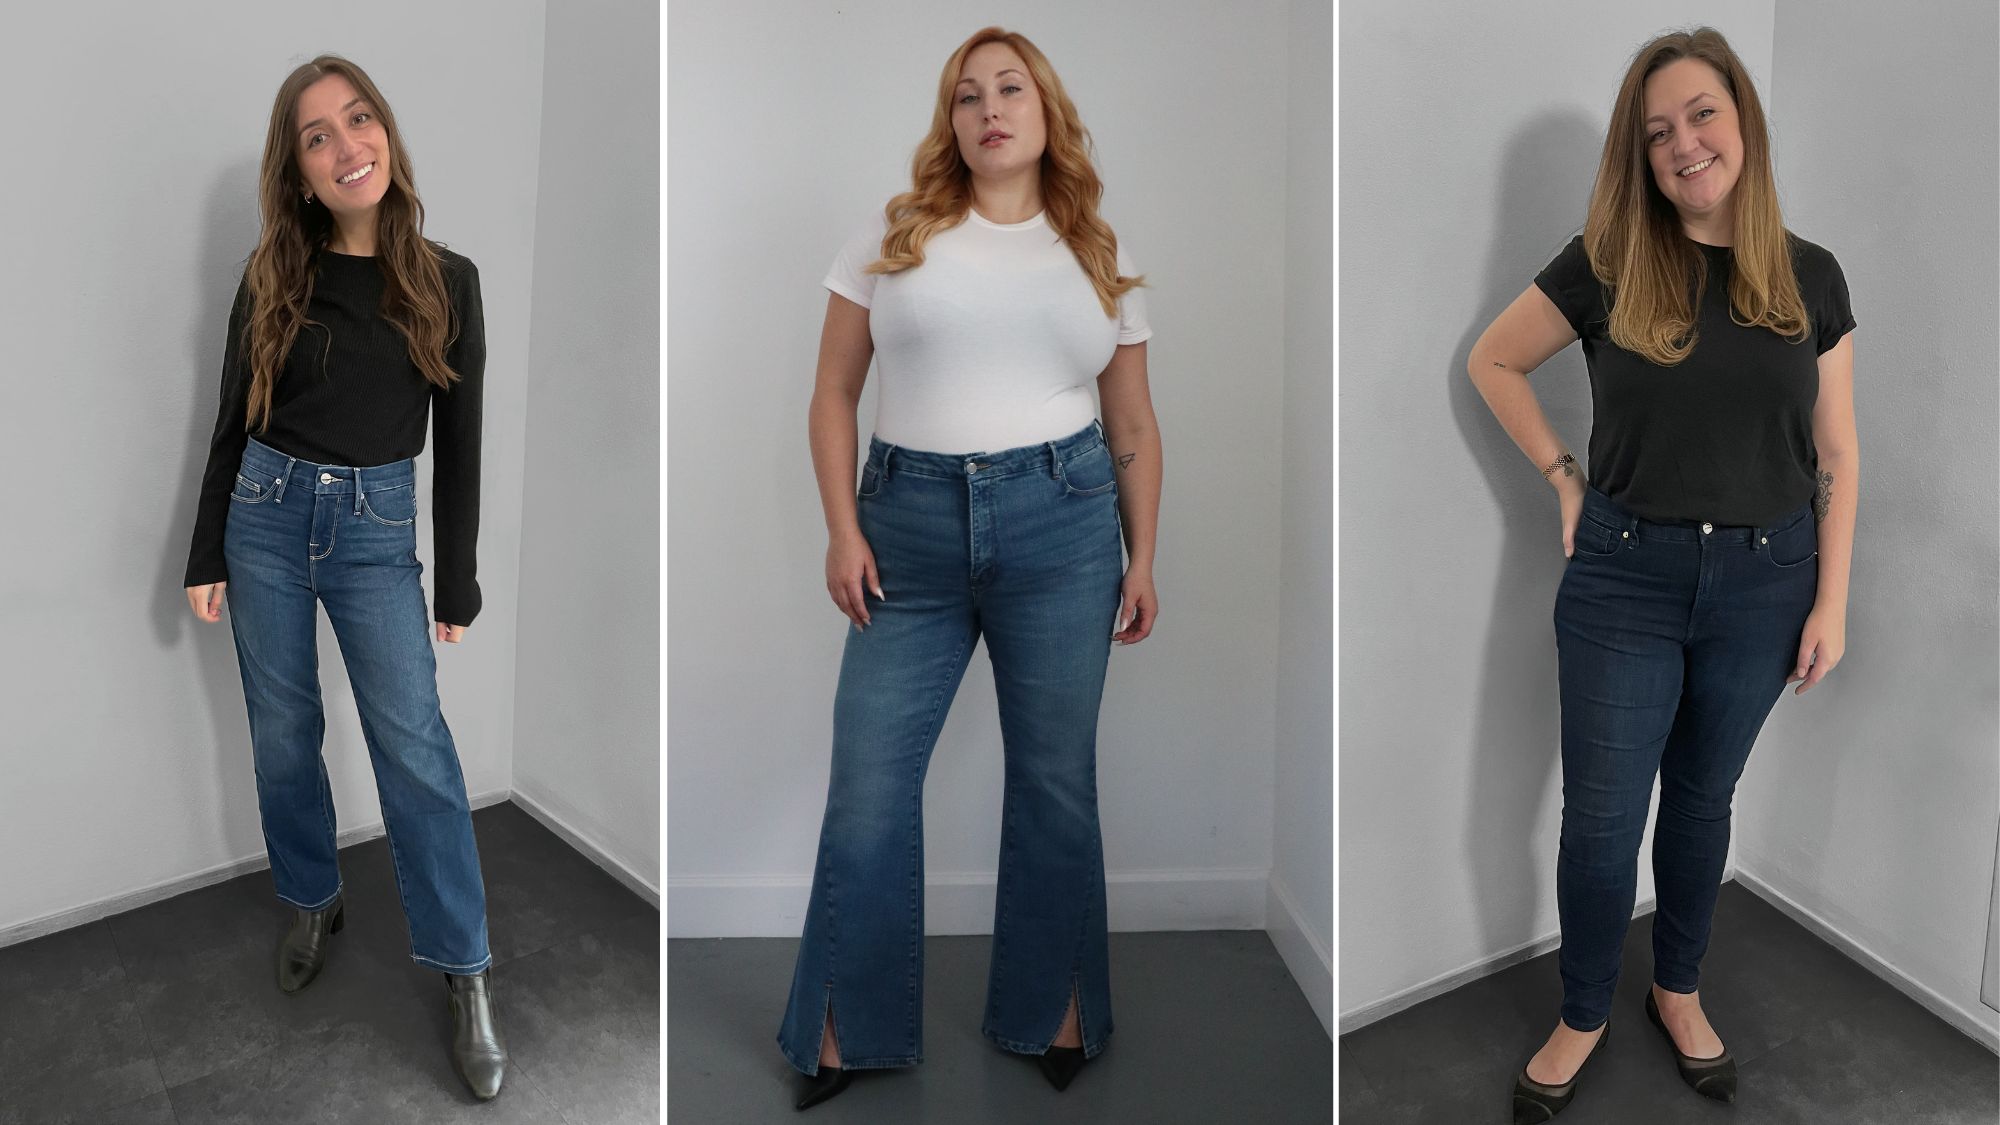 We Tried Good American Jeans, Here Are Our Editor Reviews